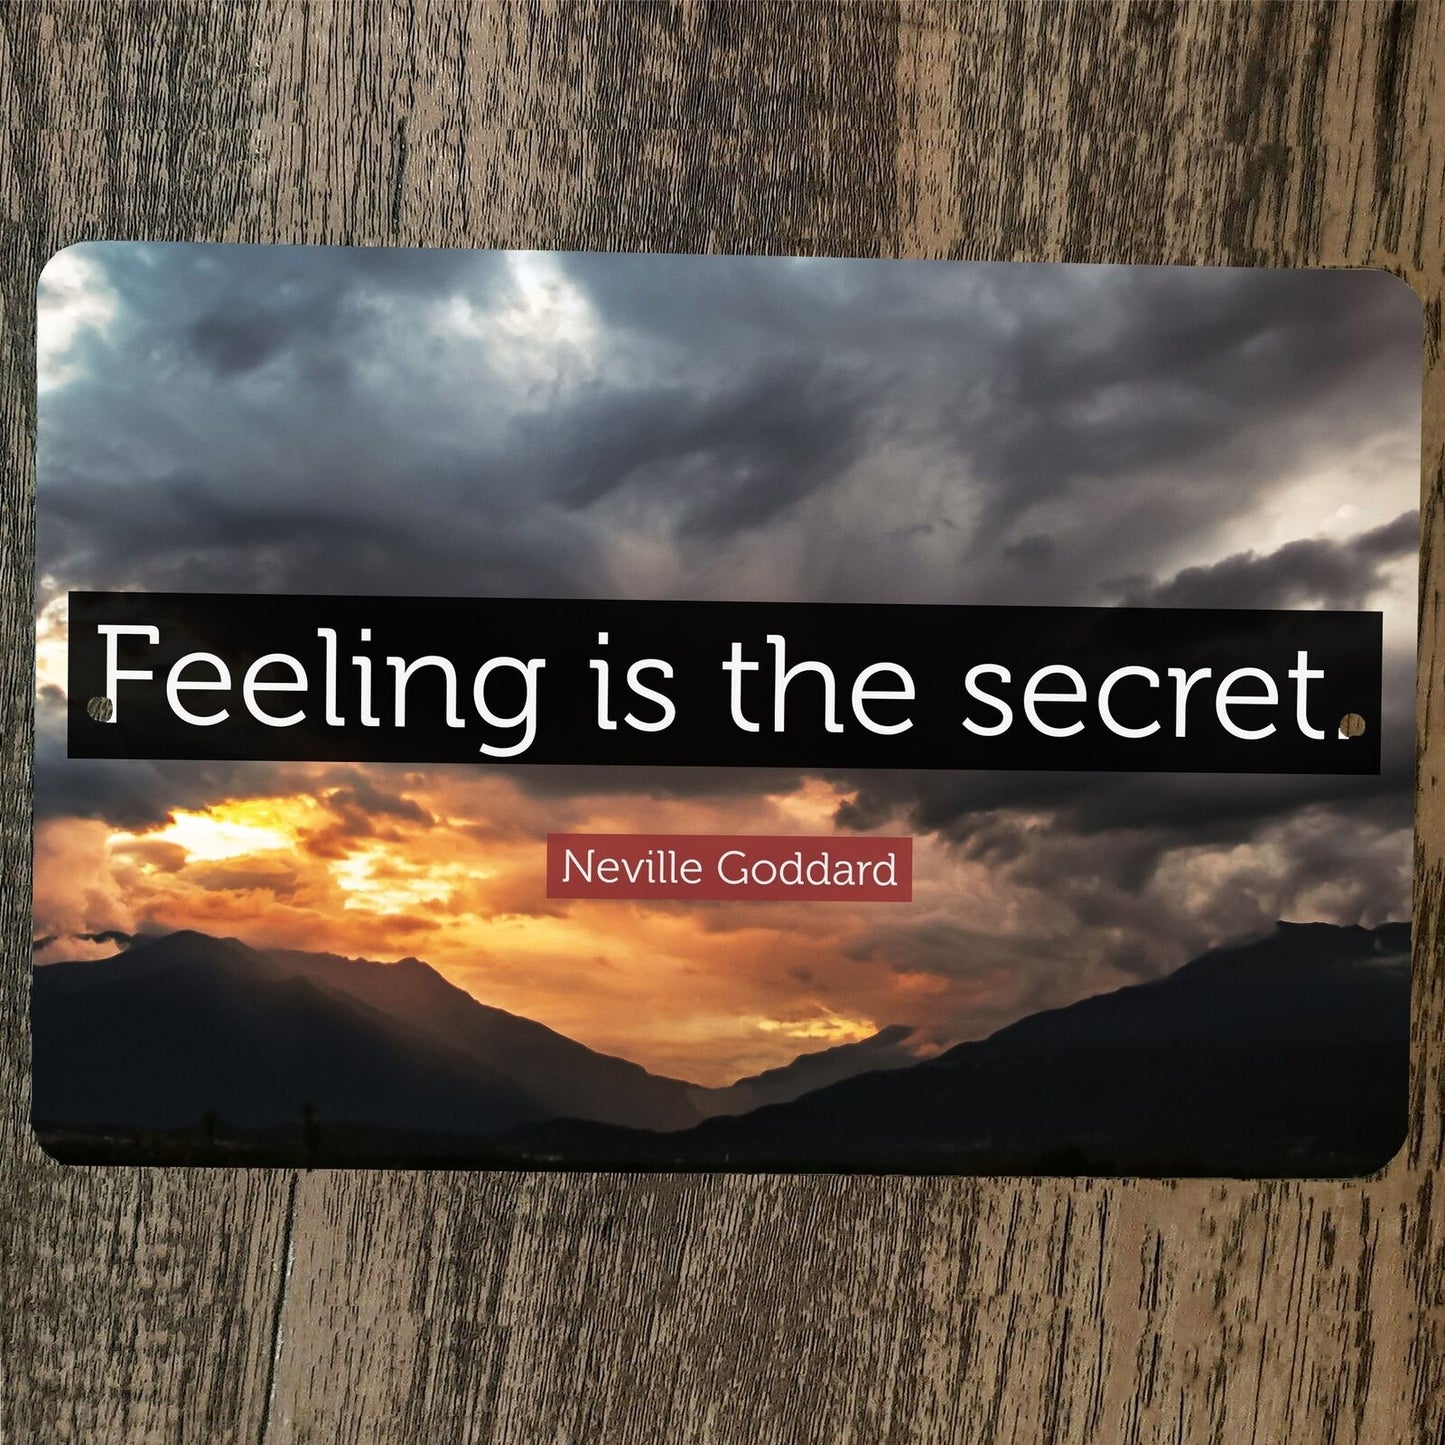 Feeling is the Secret Quote Neville Goddard 8x12 Metal Wall Sign